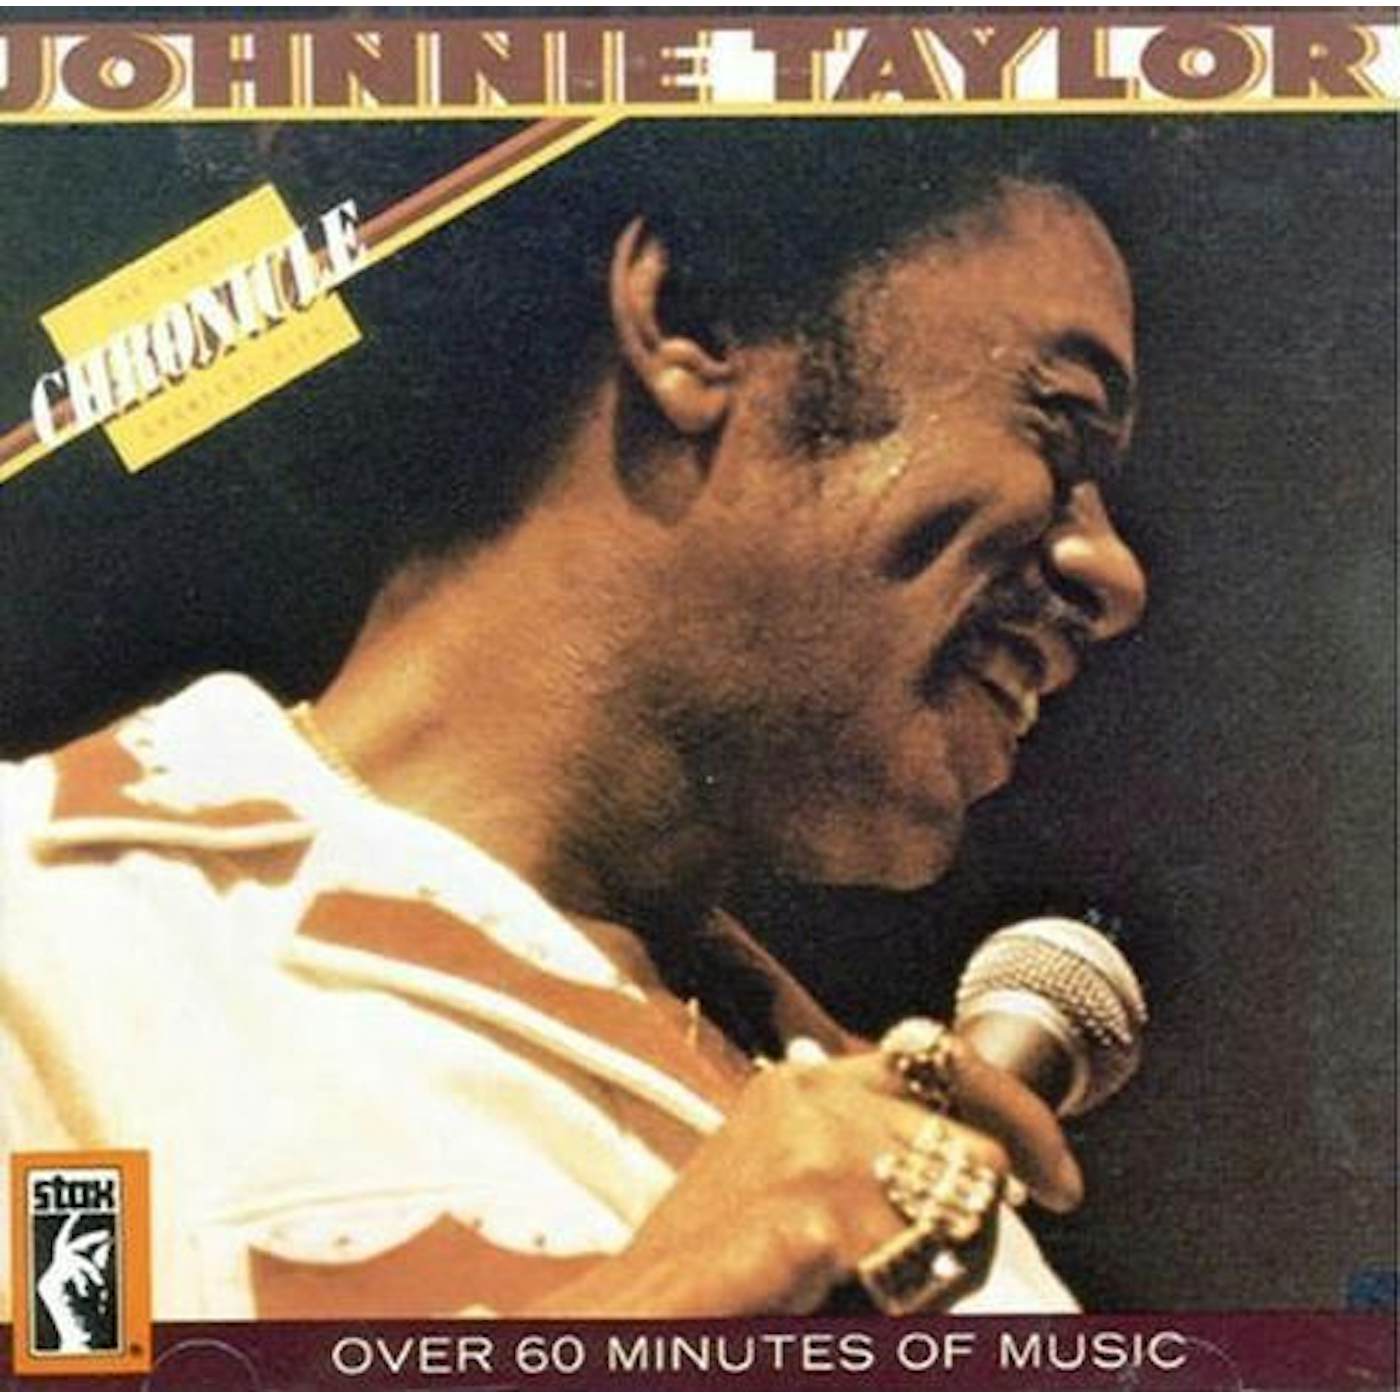 Johnnie Taylor CHRONICLE: 20 GREATEST HITS CD